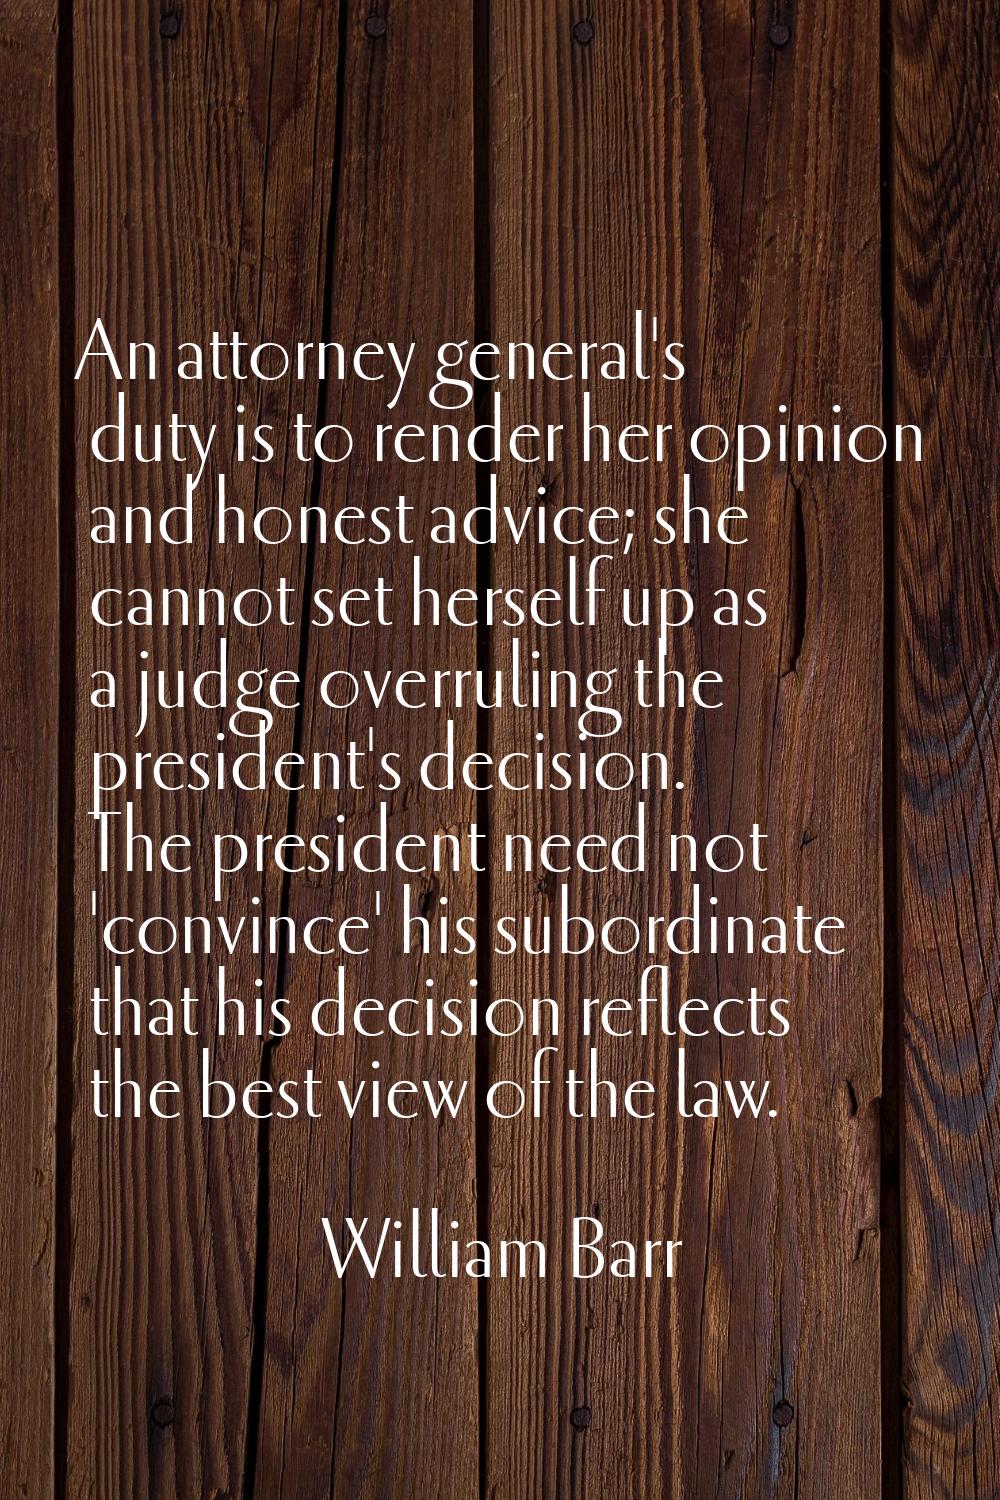 An attorney general's duty is to render her opinion and honest advice; she cannot set herself up as